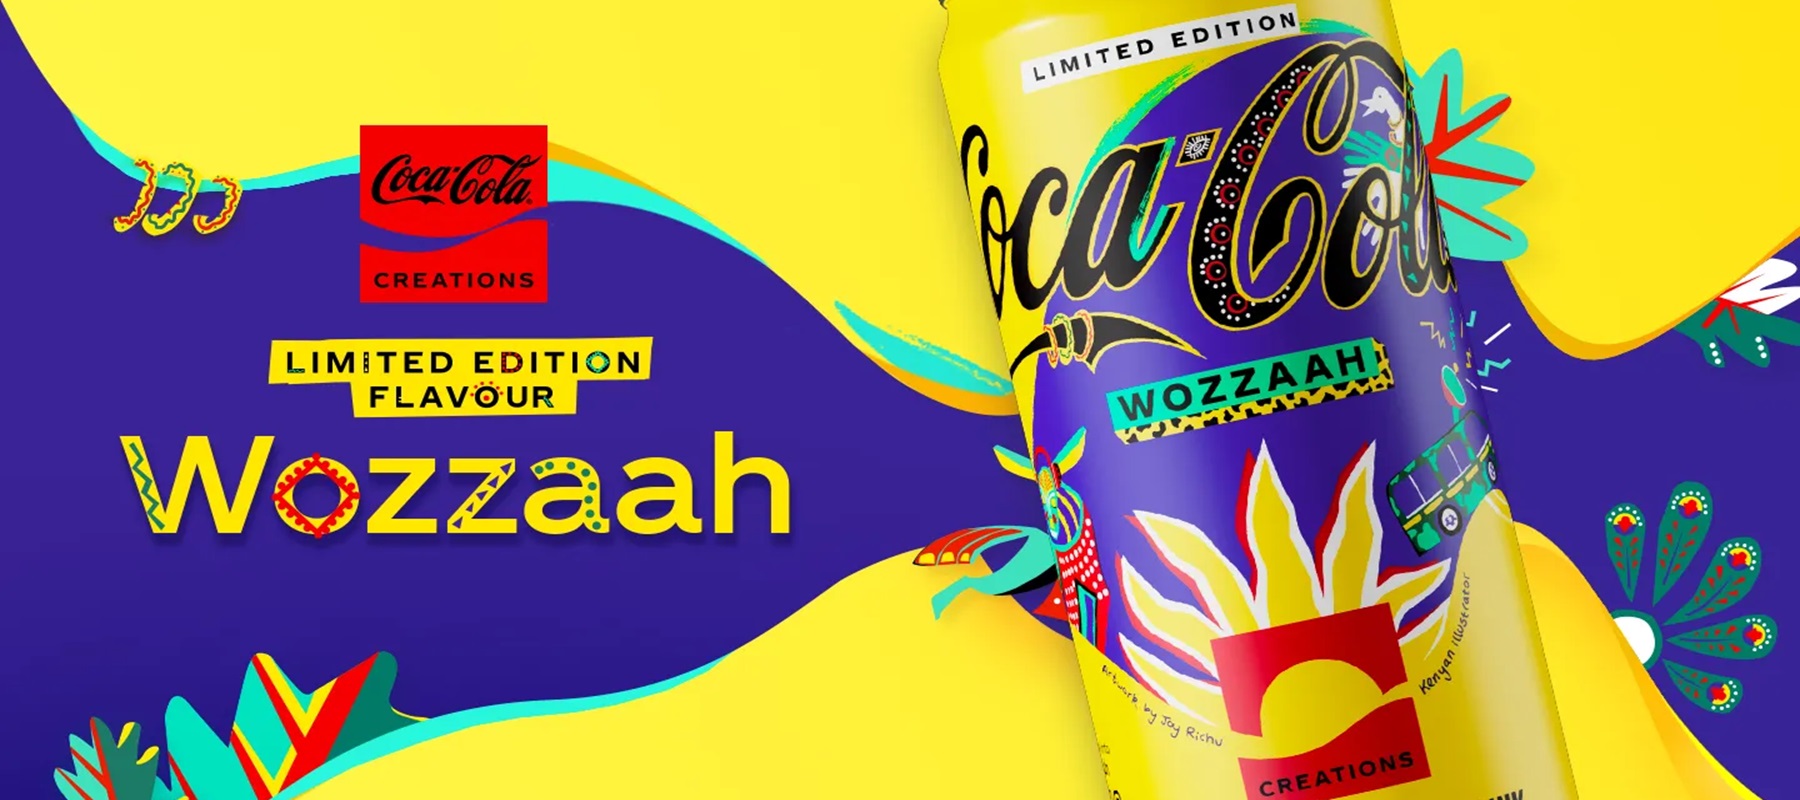 Coca-Cola launches limited edition creation inspired by African culture